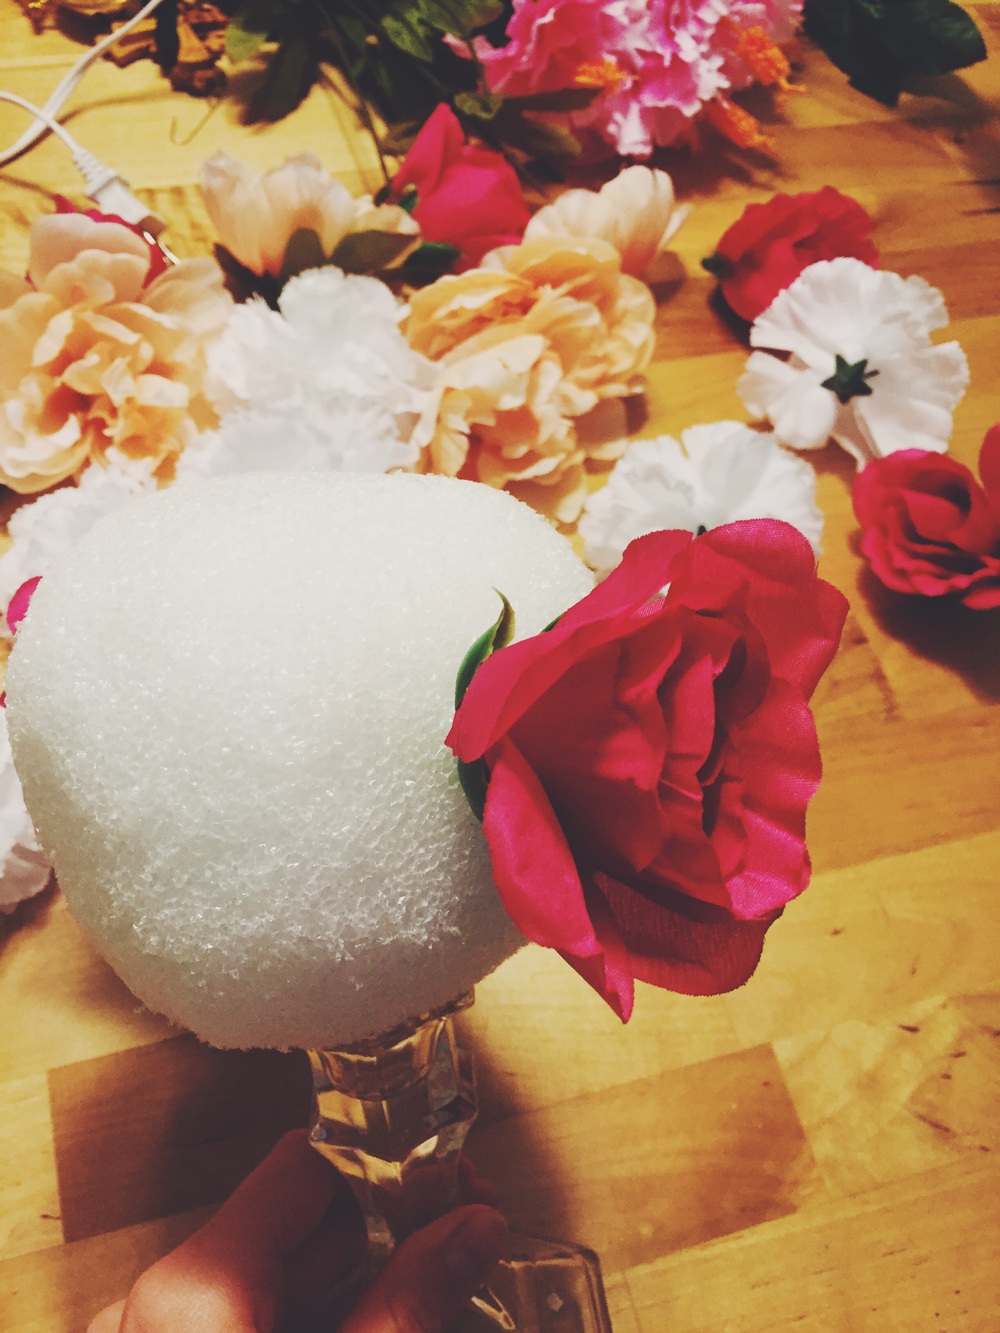 DIY Floral Sphere Center Piece | Dollar Tree Crafts | Linn Style by Cary North Carolina fashion and lifestyle blogger Jessica Linn.